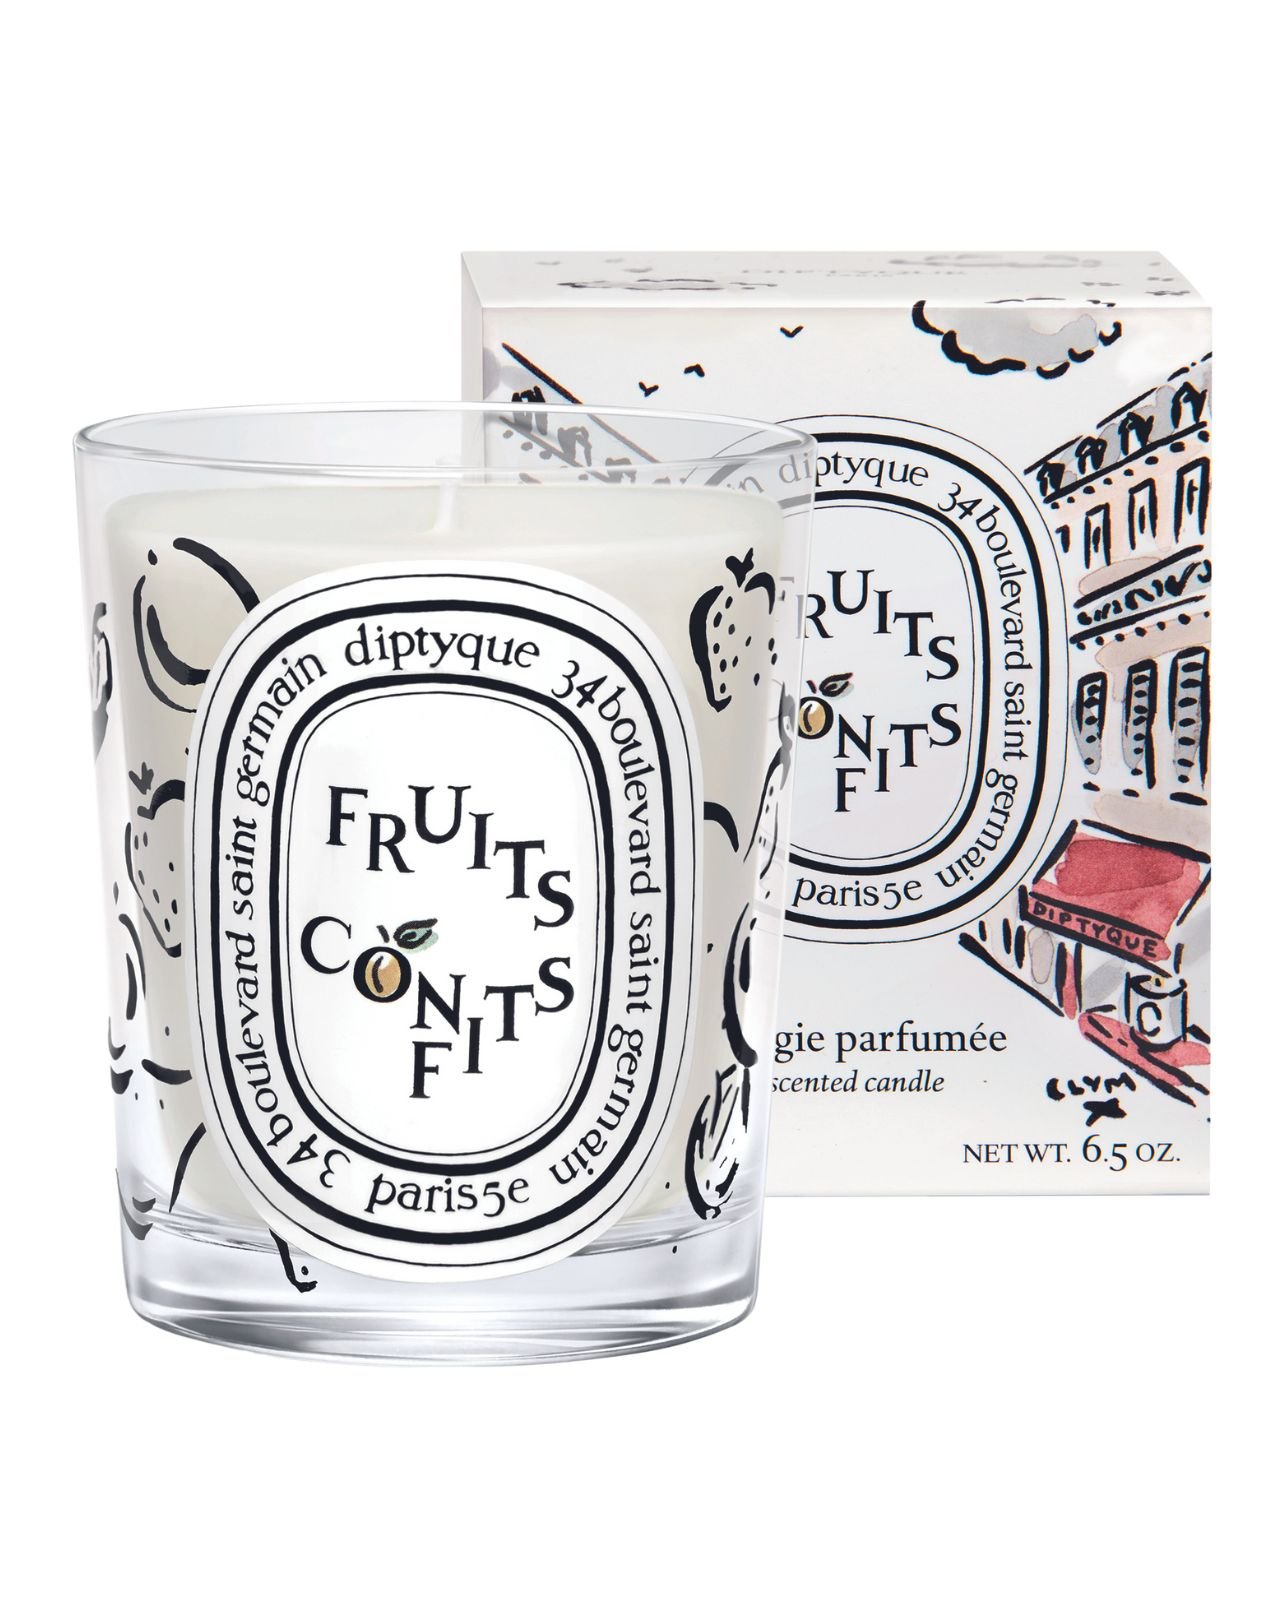 Diptyque fruit confits scented candle with illustrated box